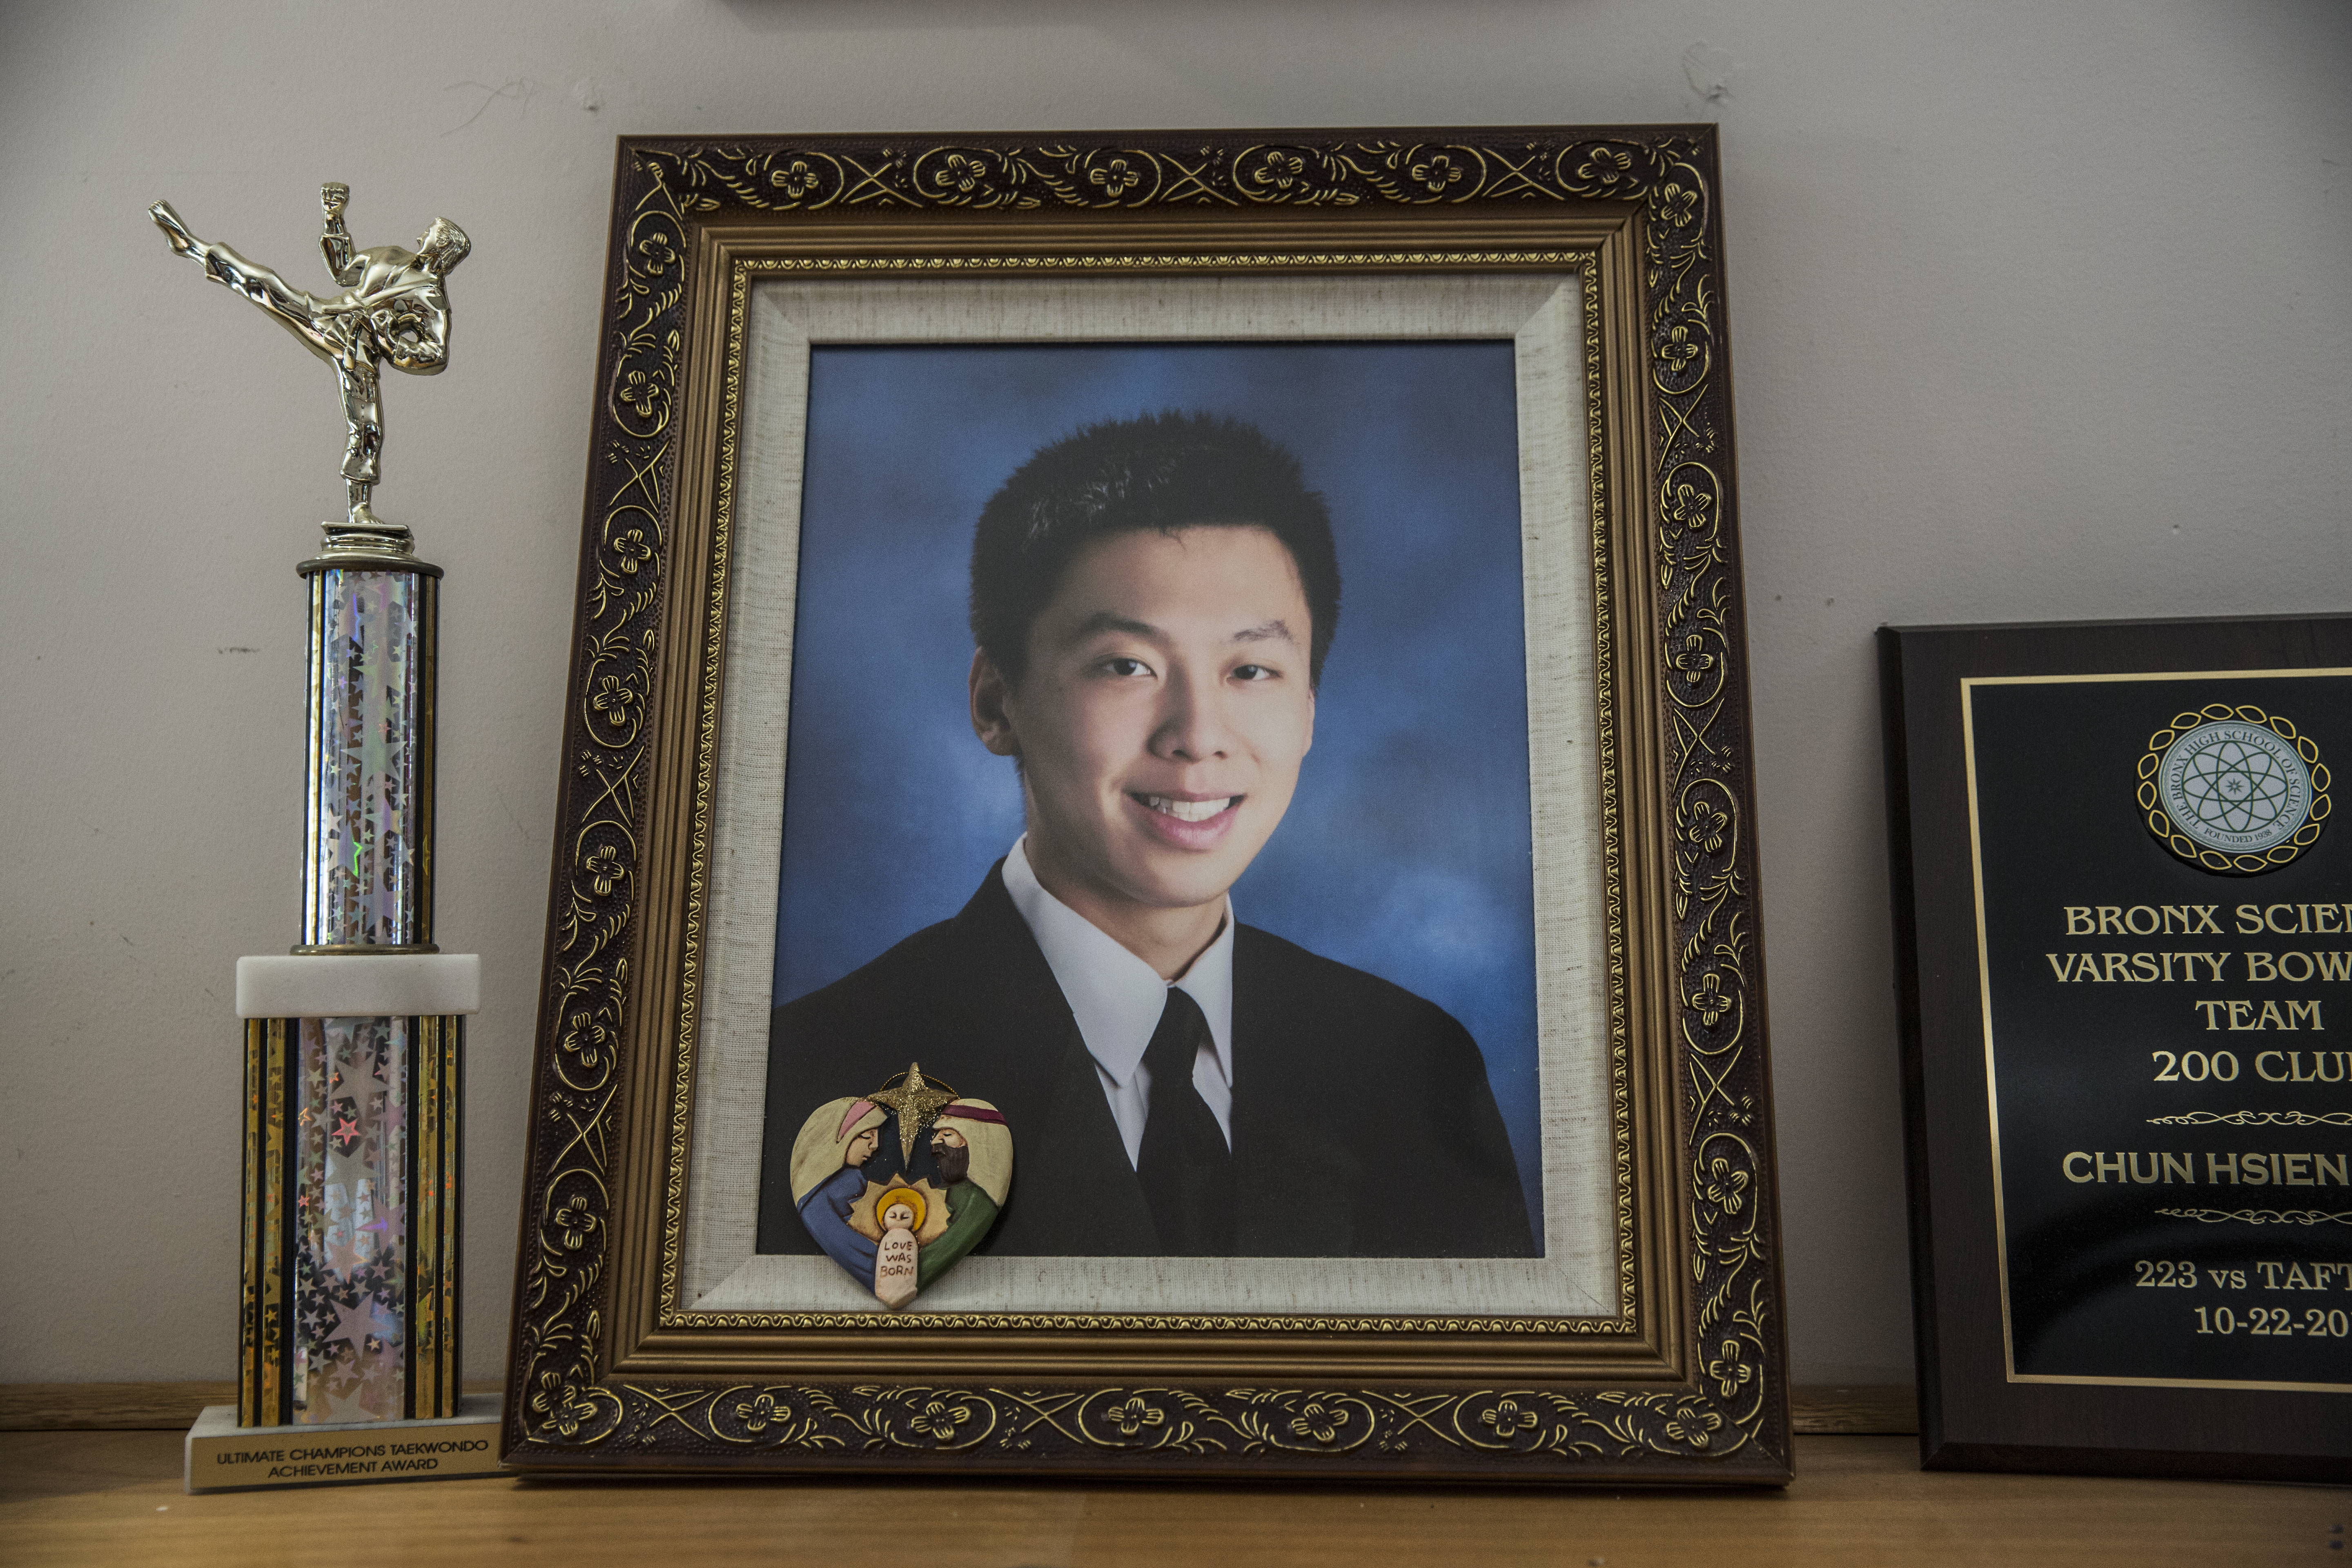 Awards and a photo of Michael Deng, who died after a fraternity hazing ritual,
are displayed at his family’s home in Queens